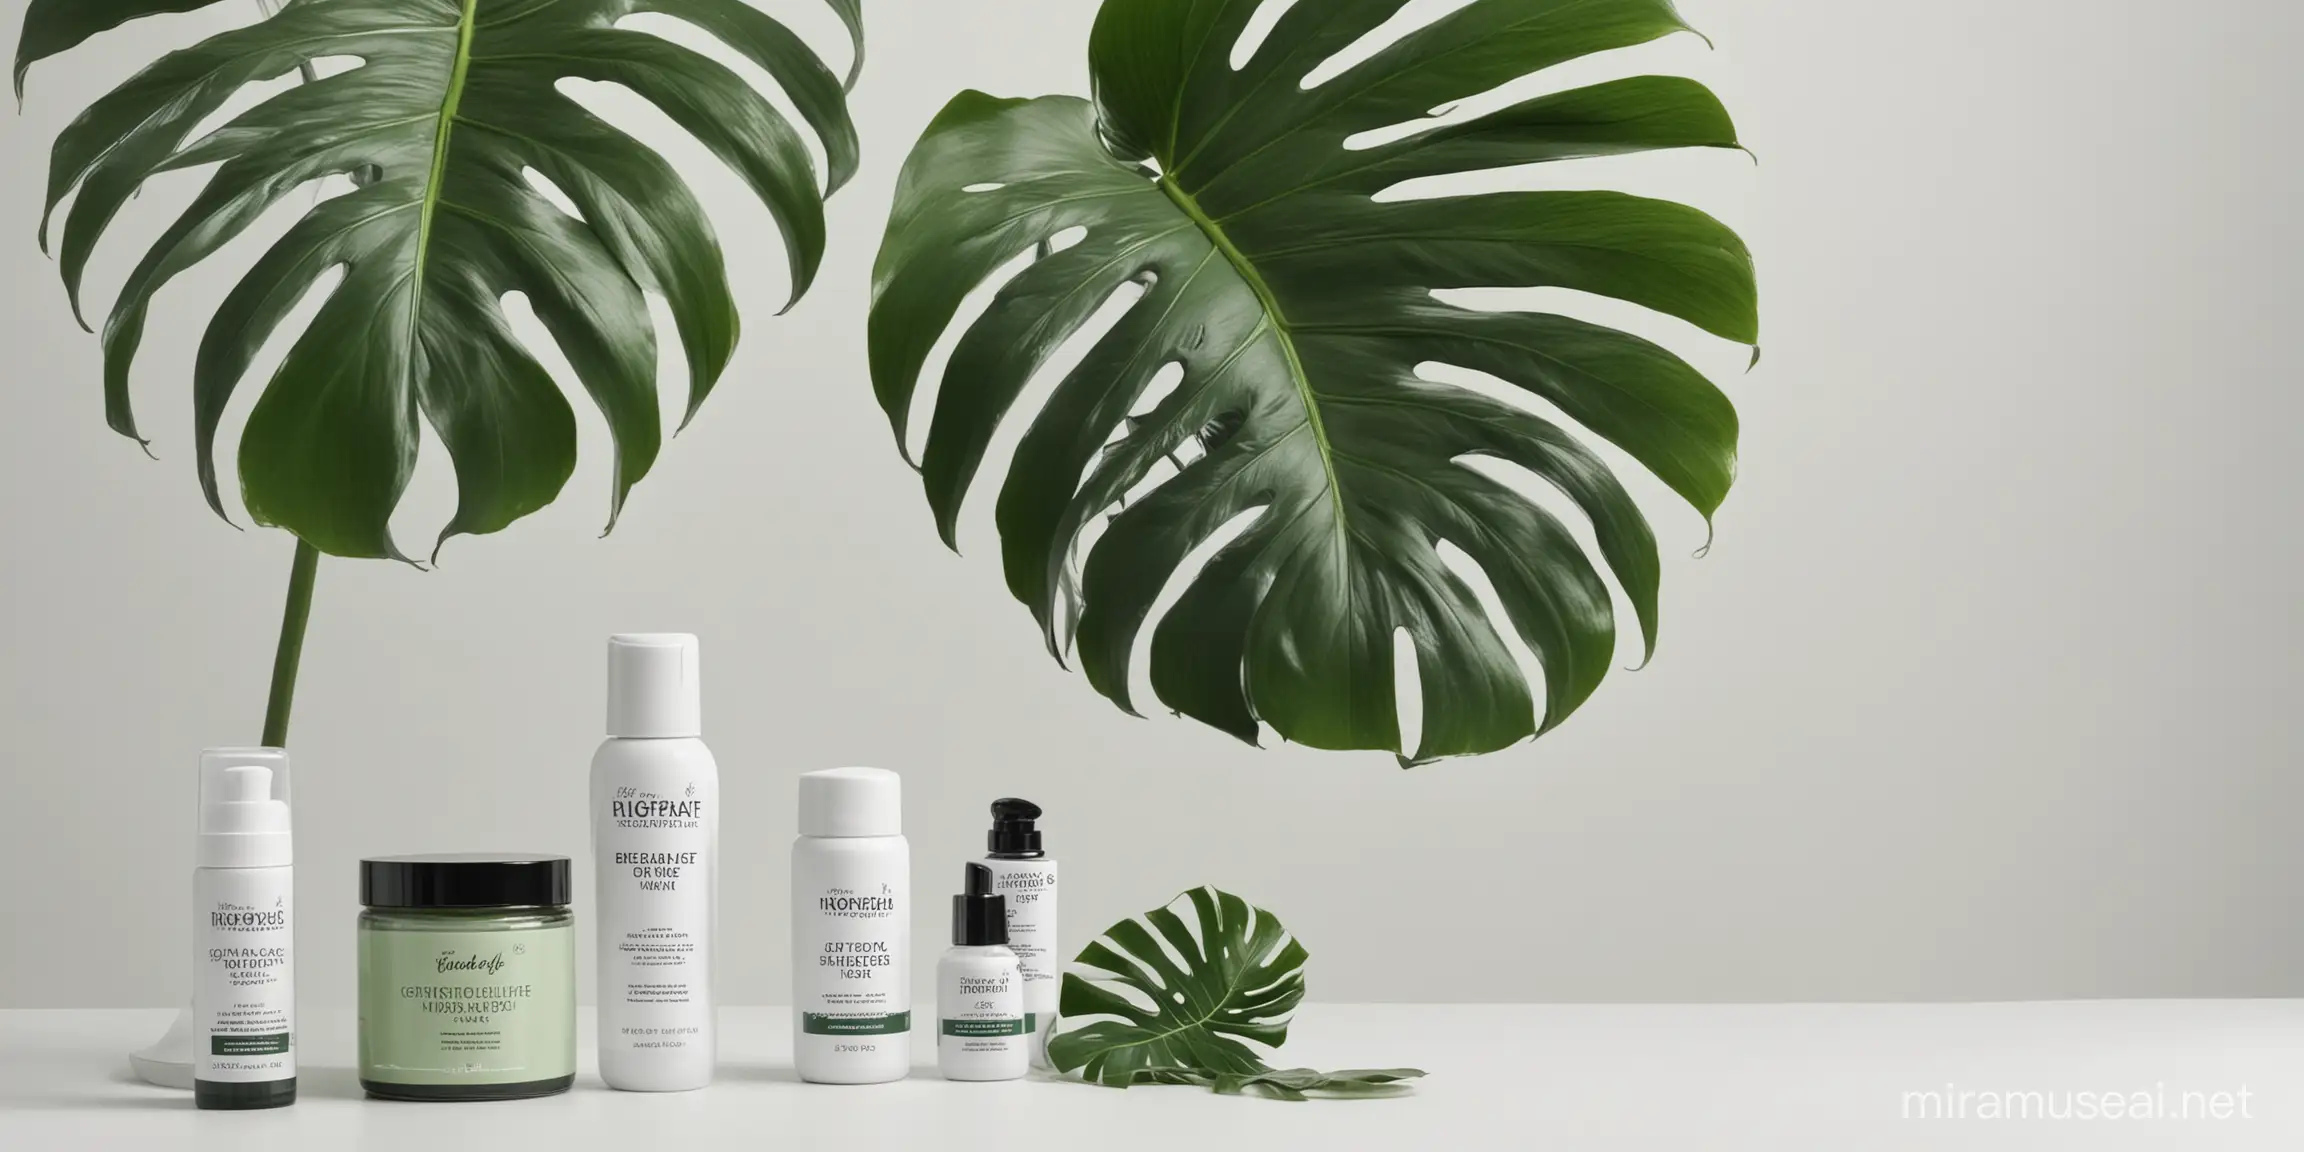 Banner of 'VivaLeaf' beauty store on marketplace that has, white blackground, a monstera leaf as prop, Skincare products that have green and white colors, wording '100 OFF' as coupon and have click botton as below.

Please cleary banner brightness